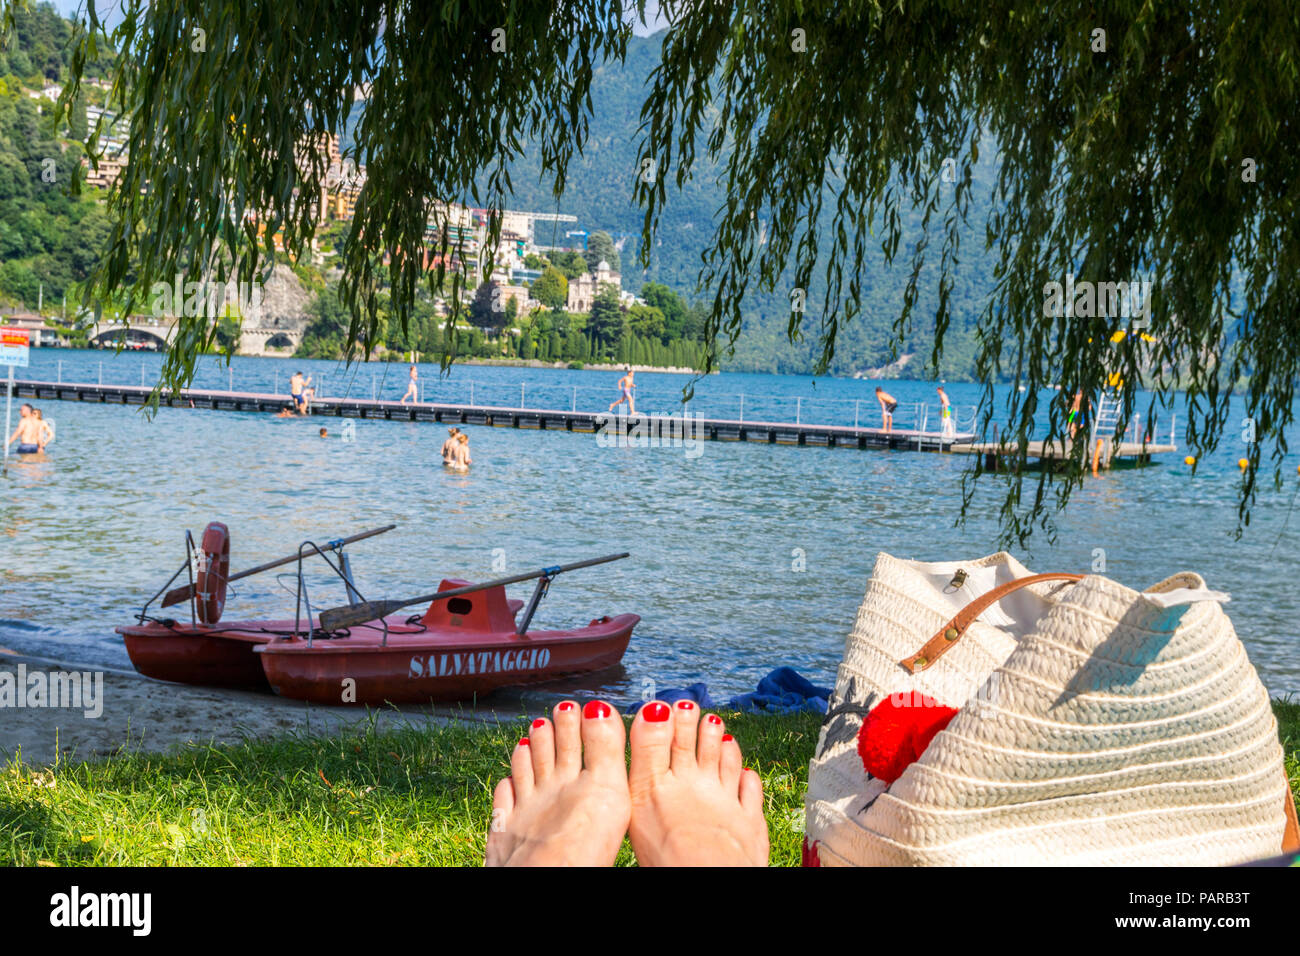 Chilling at the lake, relaxed concept, relaxing concept, switch off concept, sitting in grass, red toenails, beach bag, unplugged concept Stock Photo